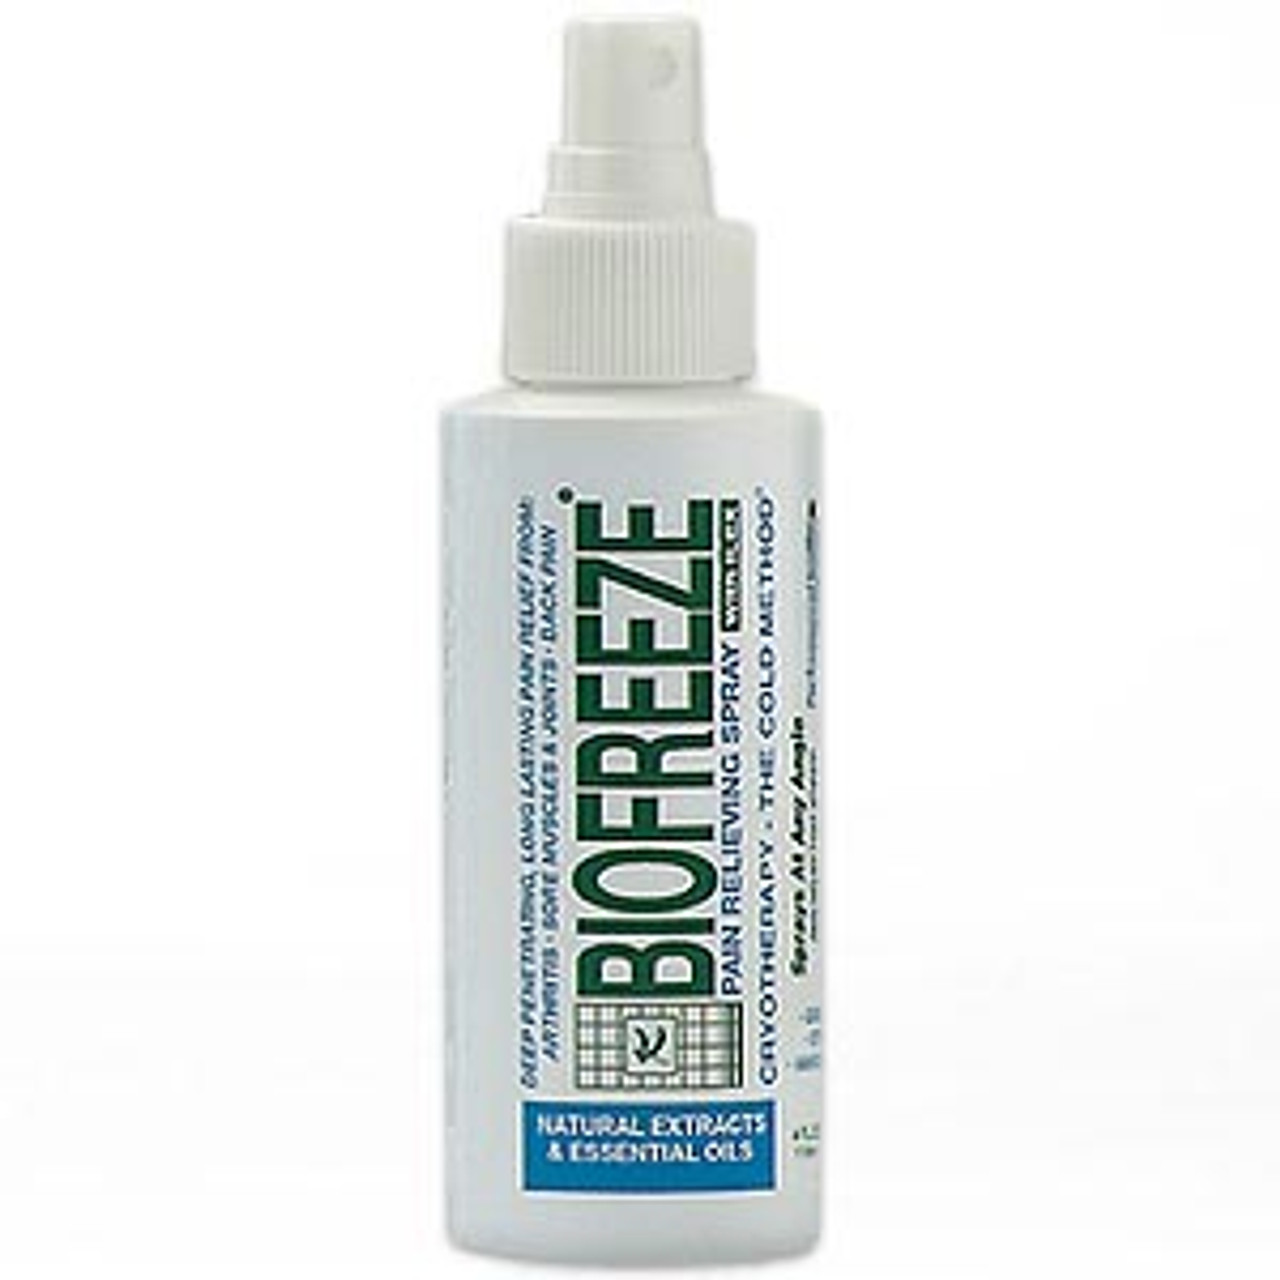 What is the Best Spray Bottle for Arthritic Hands?